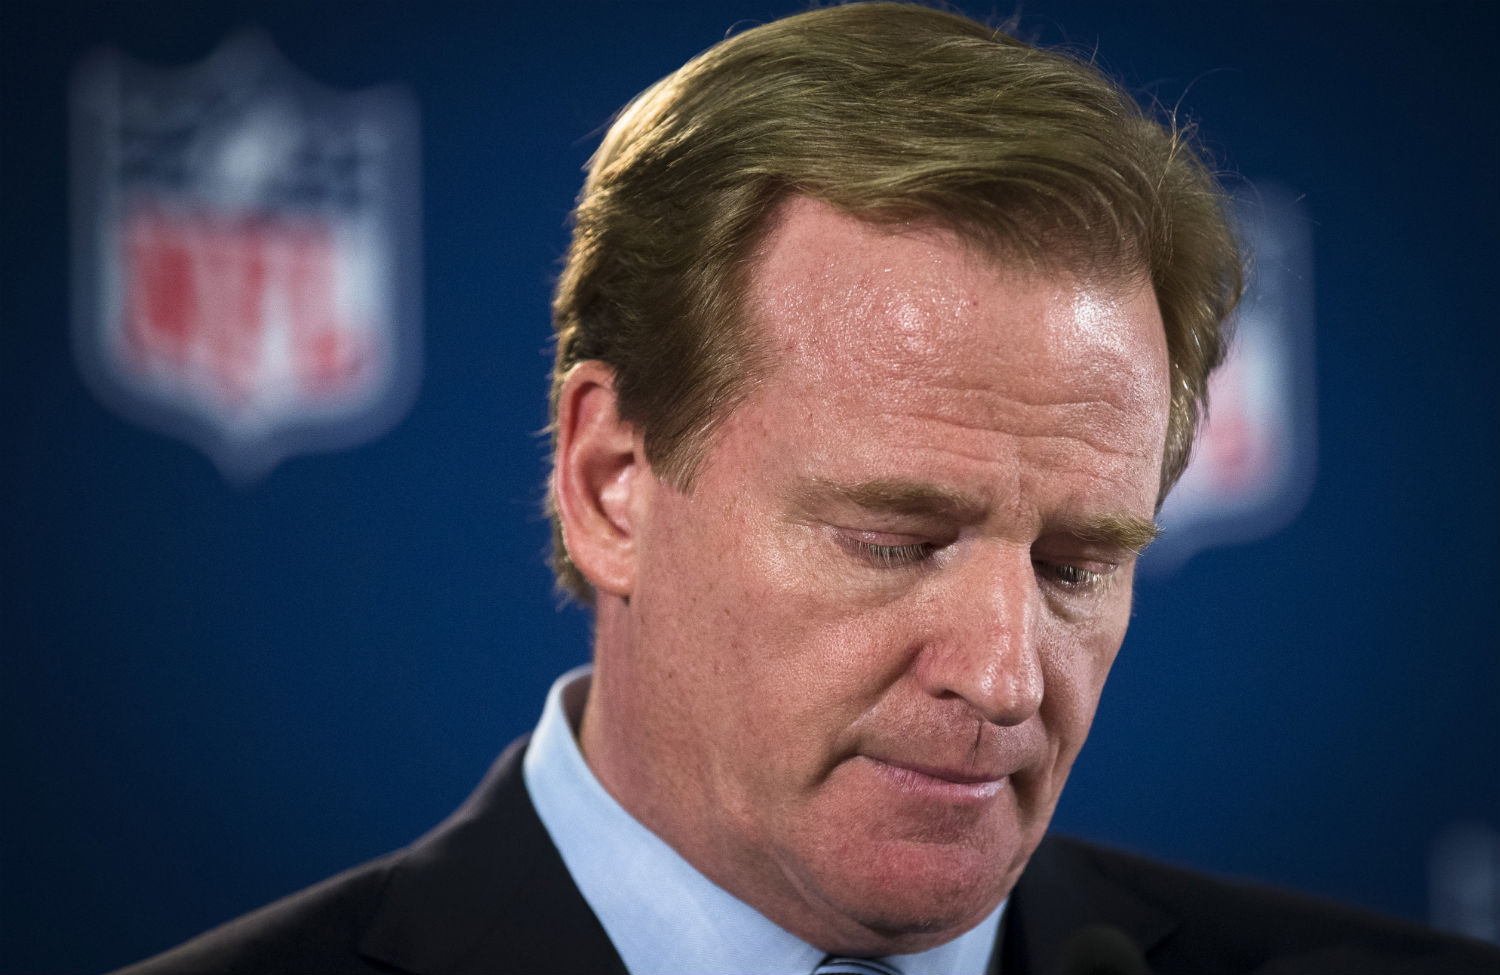 What Wouldn’t Roger Goodell Do to Save His Image?